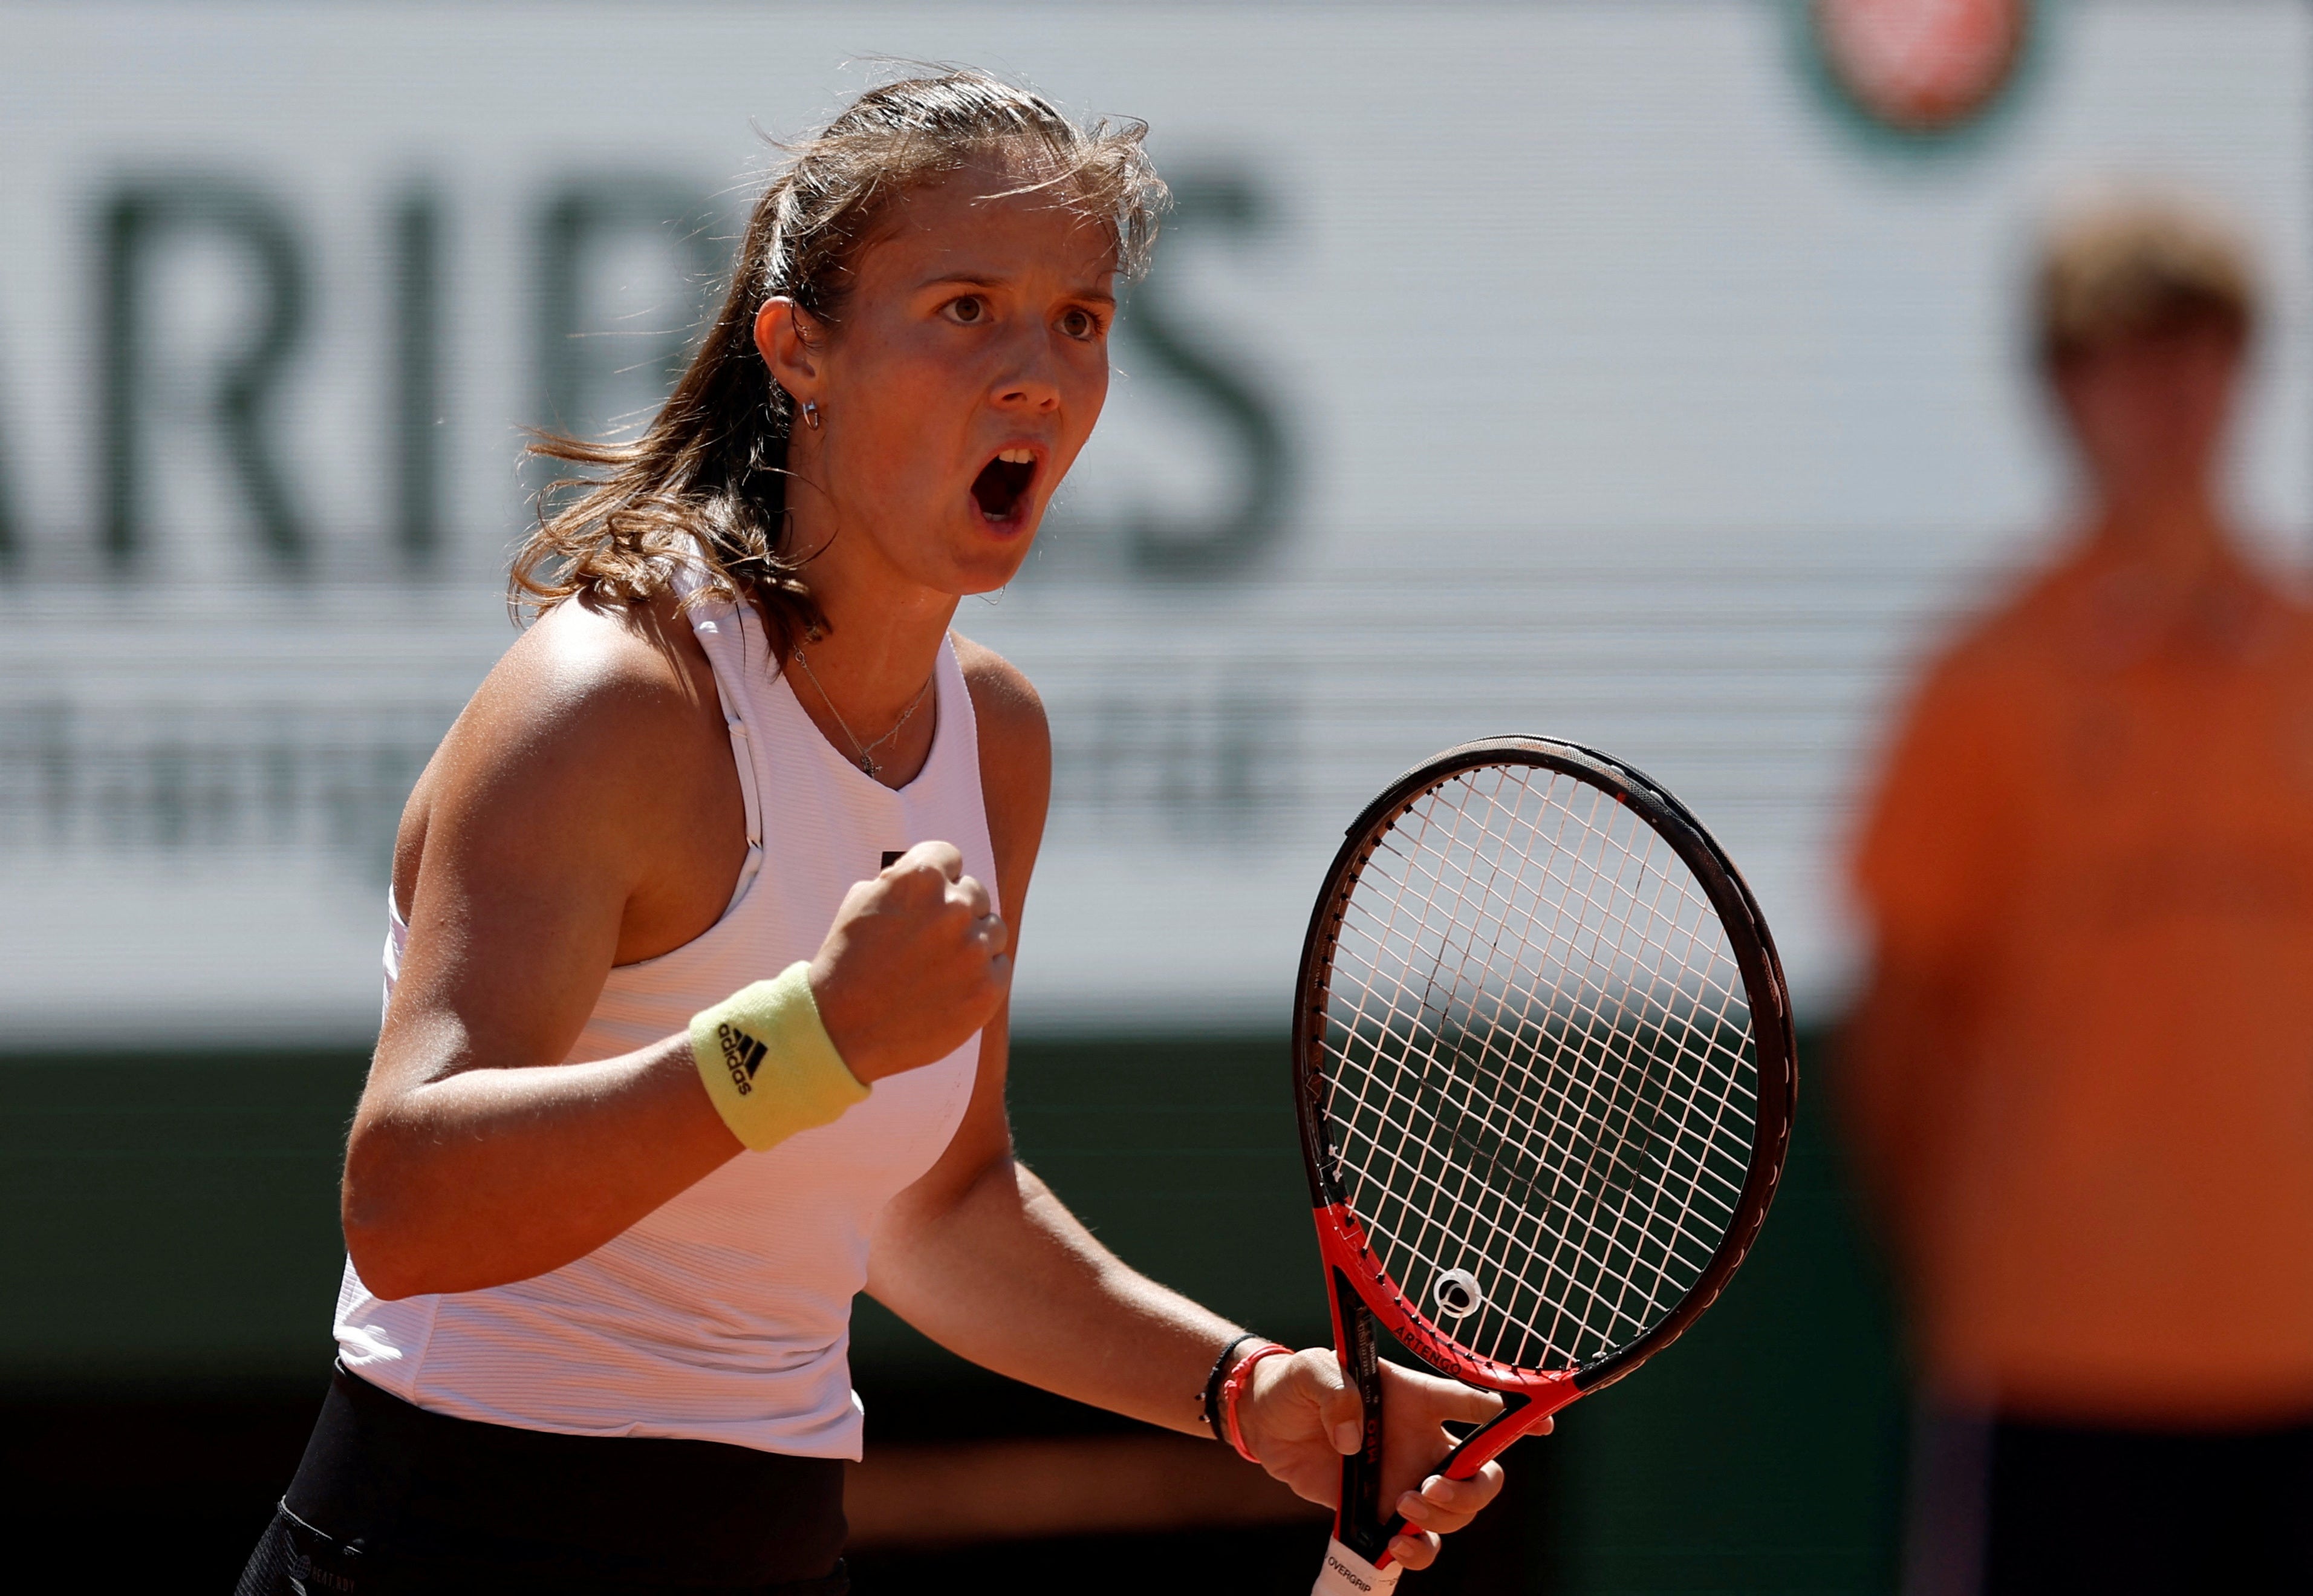 Kasatkina reached the semi-finals of last month’s French Open